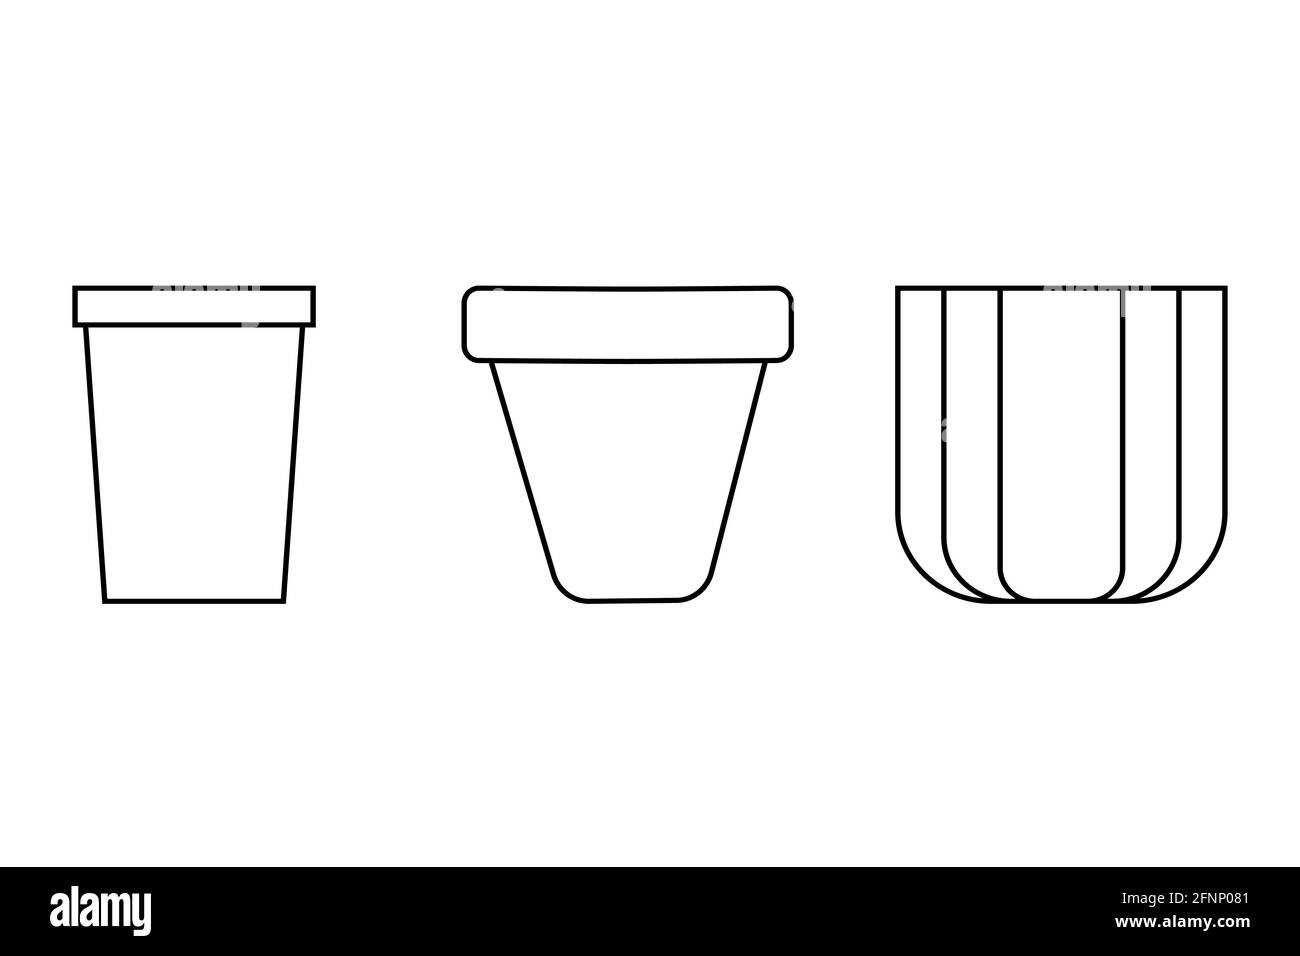 Plant pots set outline simple minimalistic flat design vector illustration isolated on white background Stock Vector